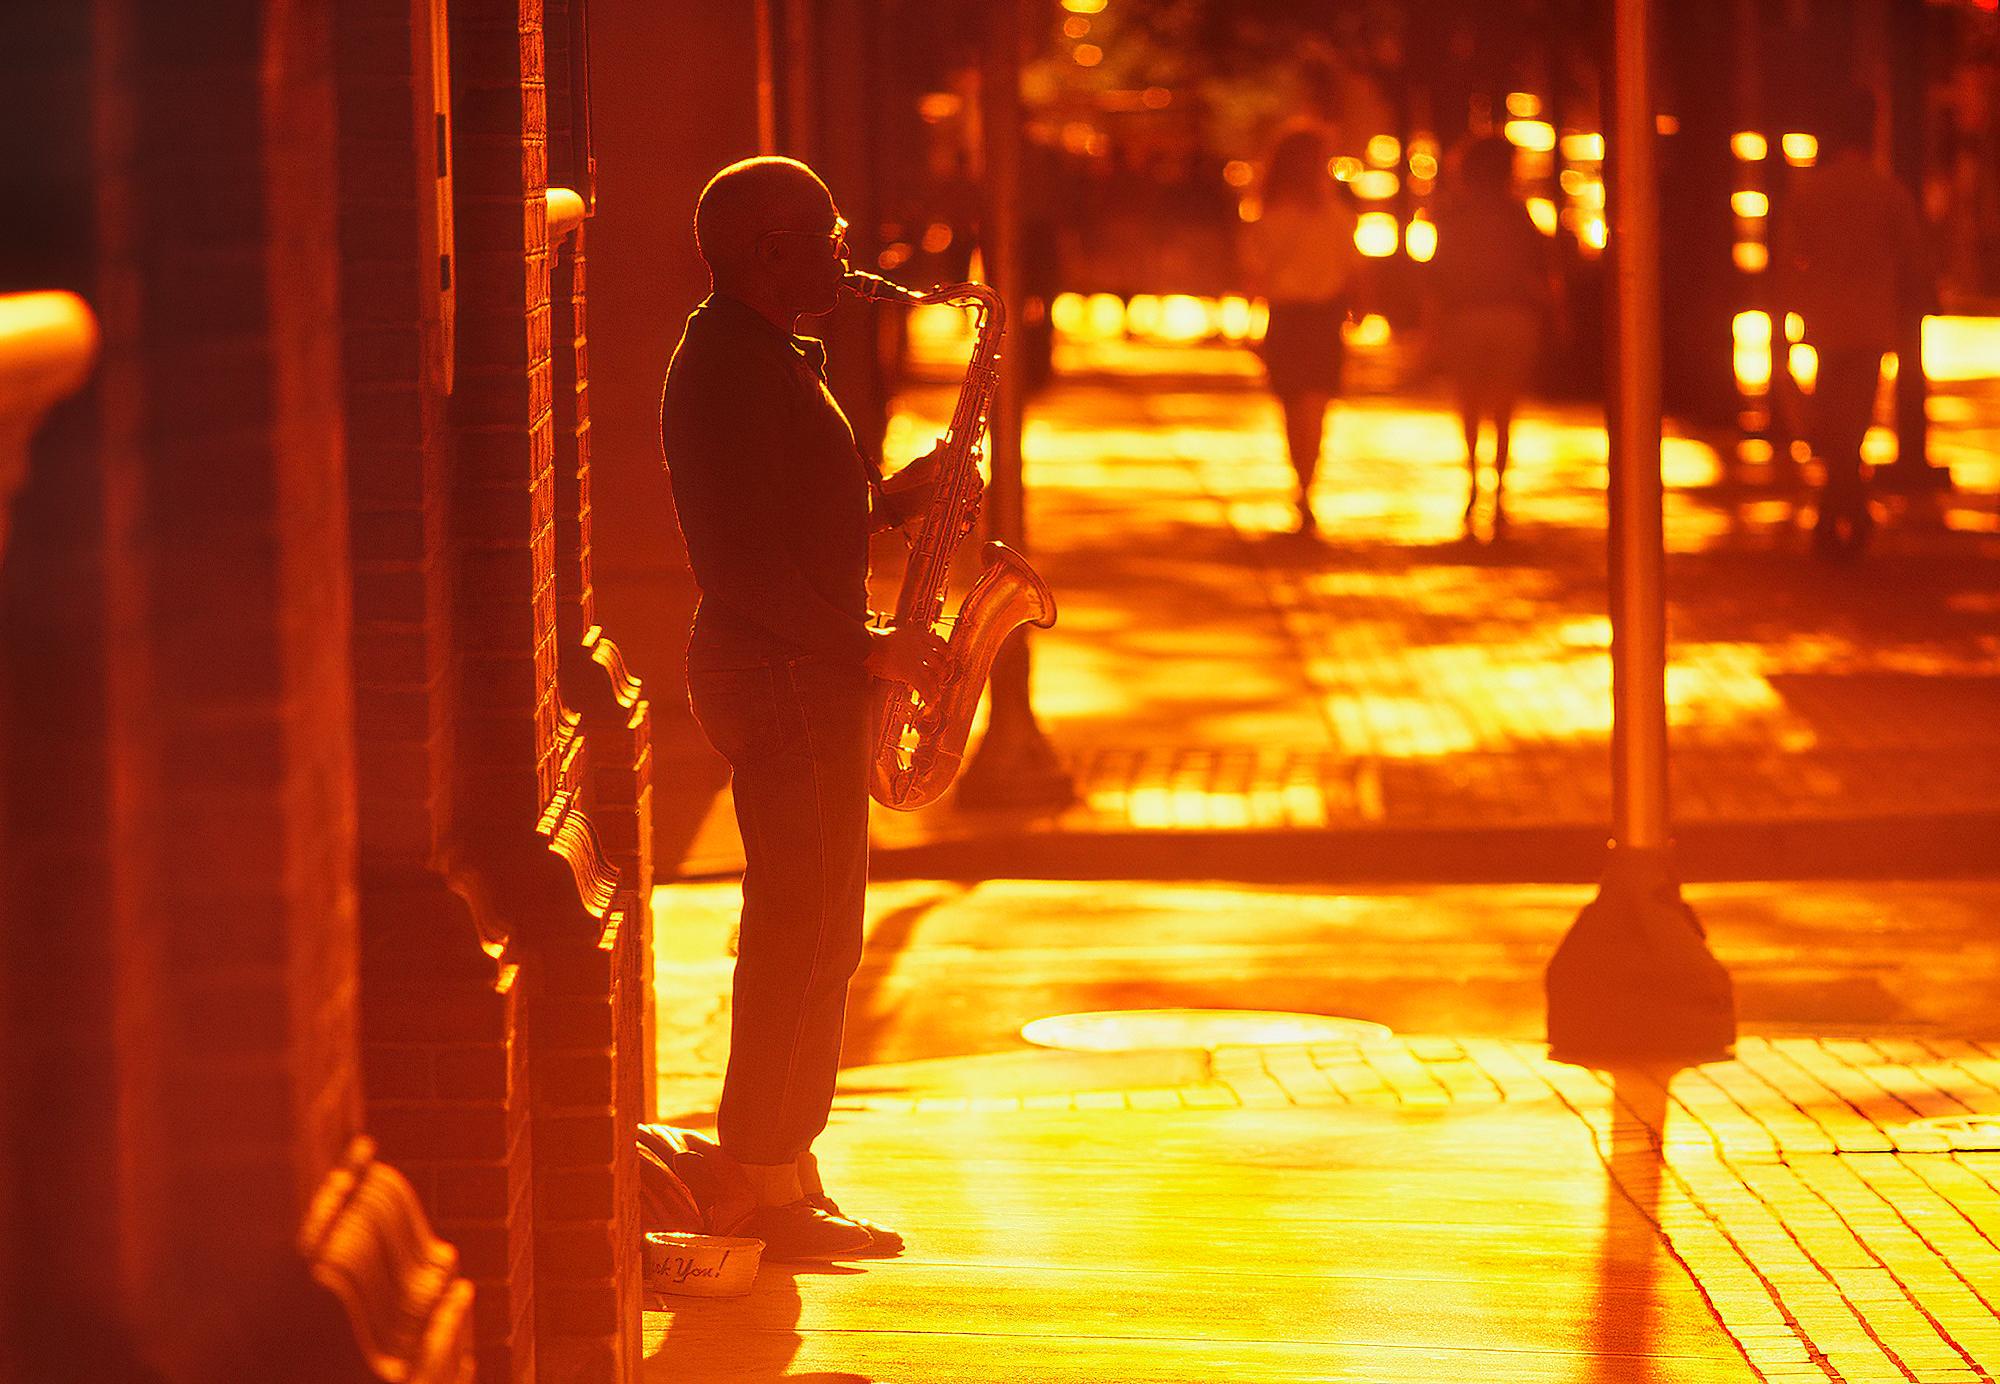 Romantic Street Musician Playing the Saxophone in Golden Light and Orange